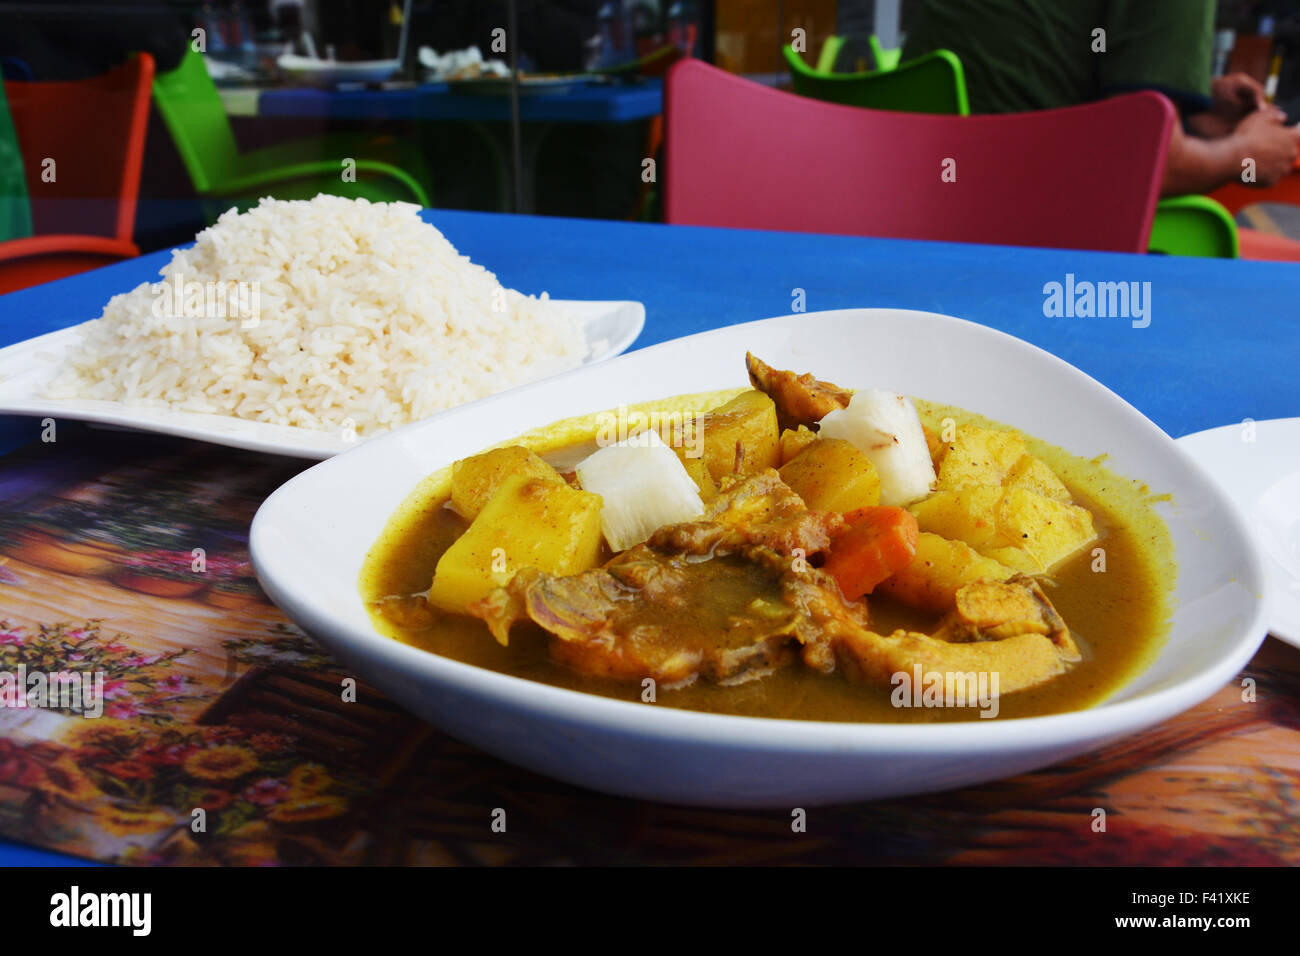 Serving of Rice and Beef Curry Stock Photo